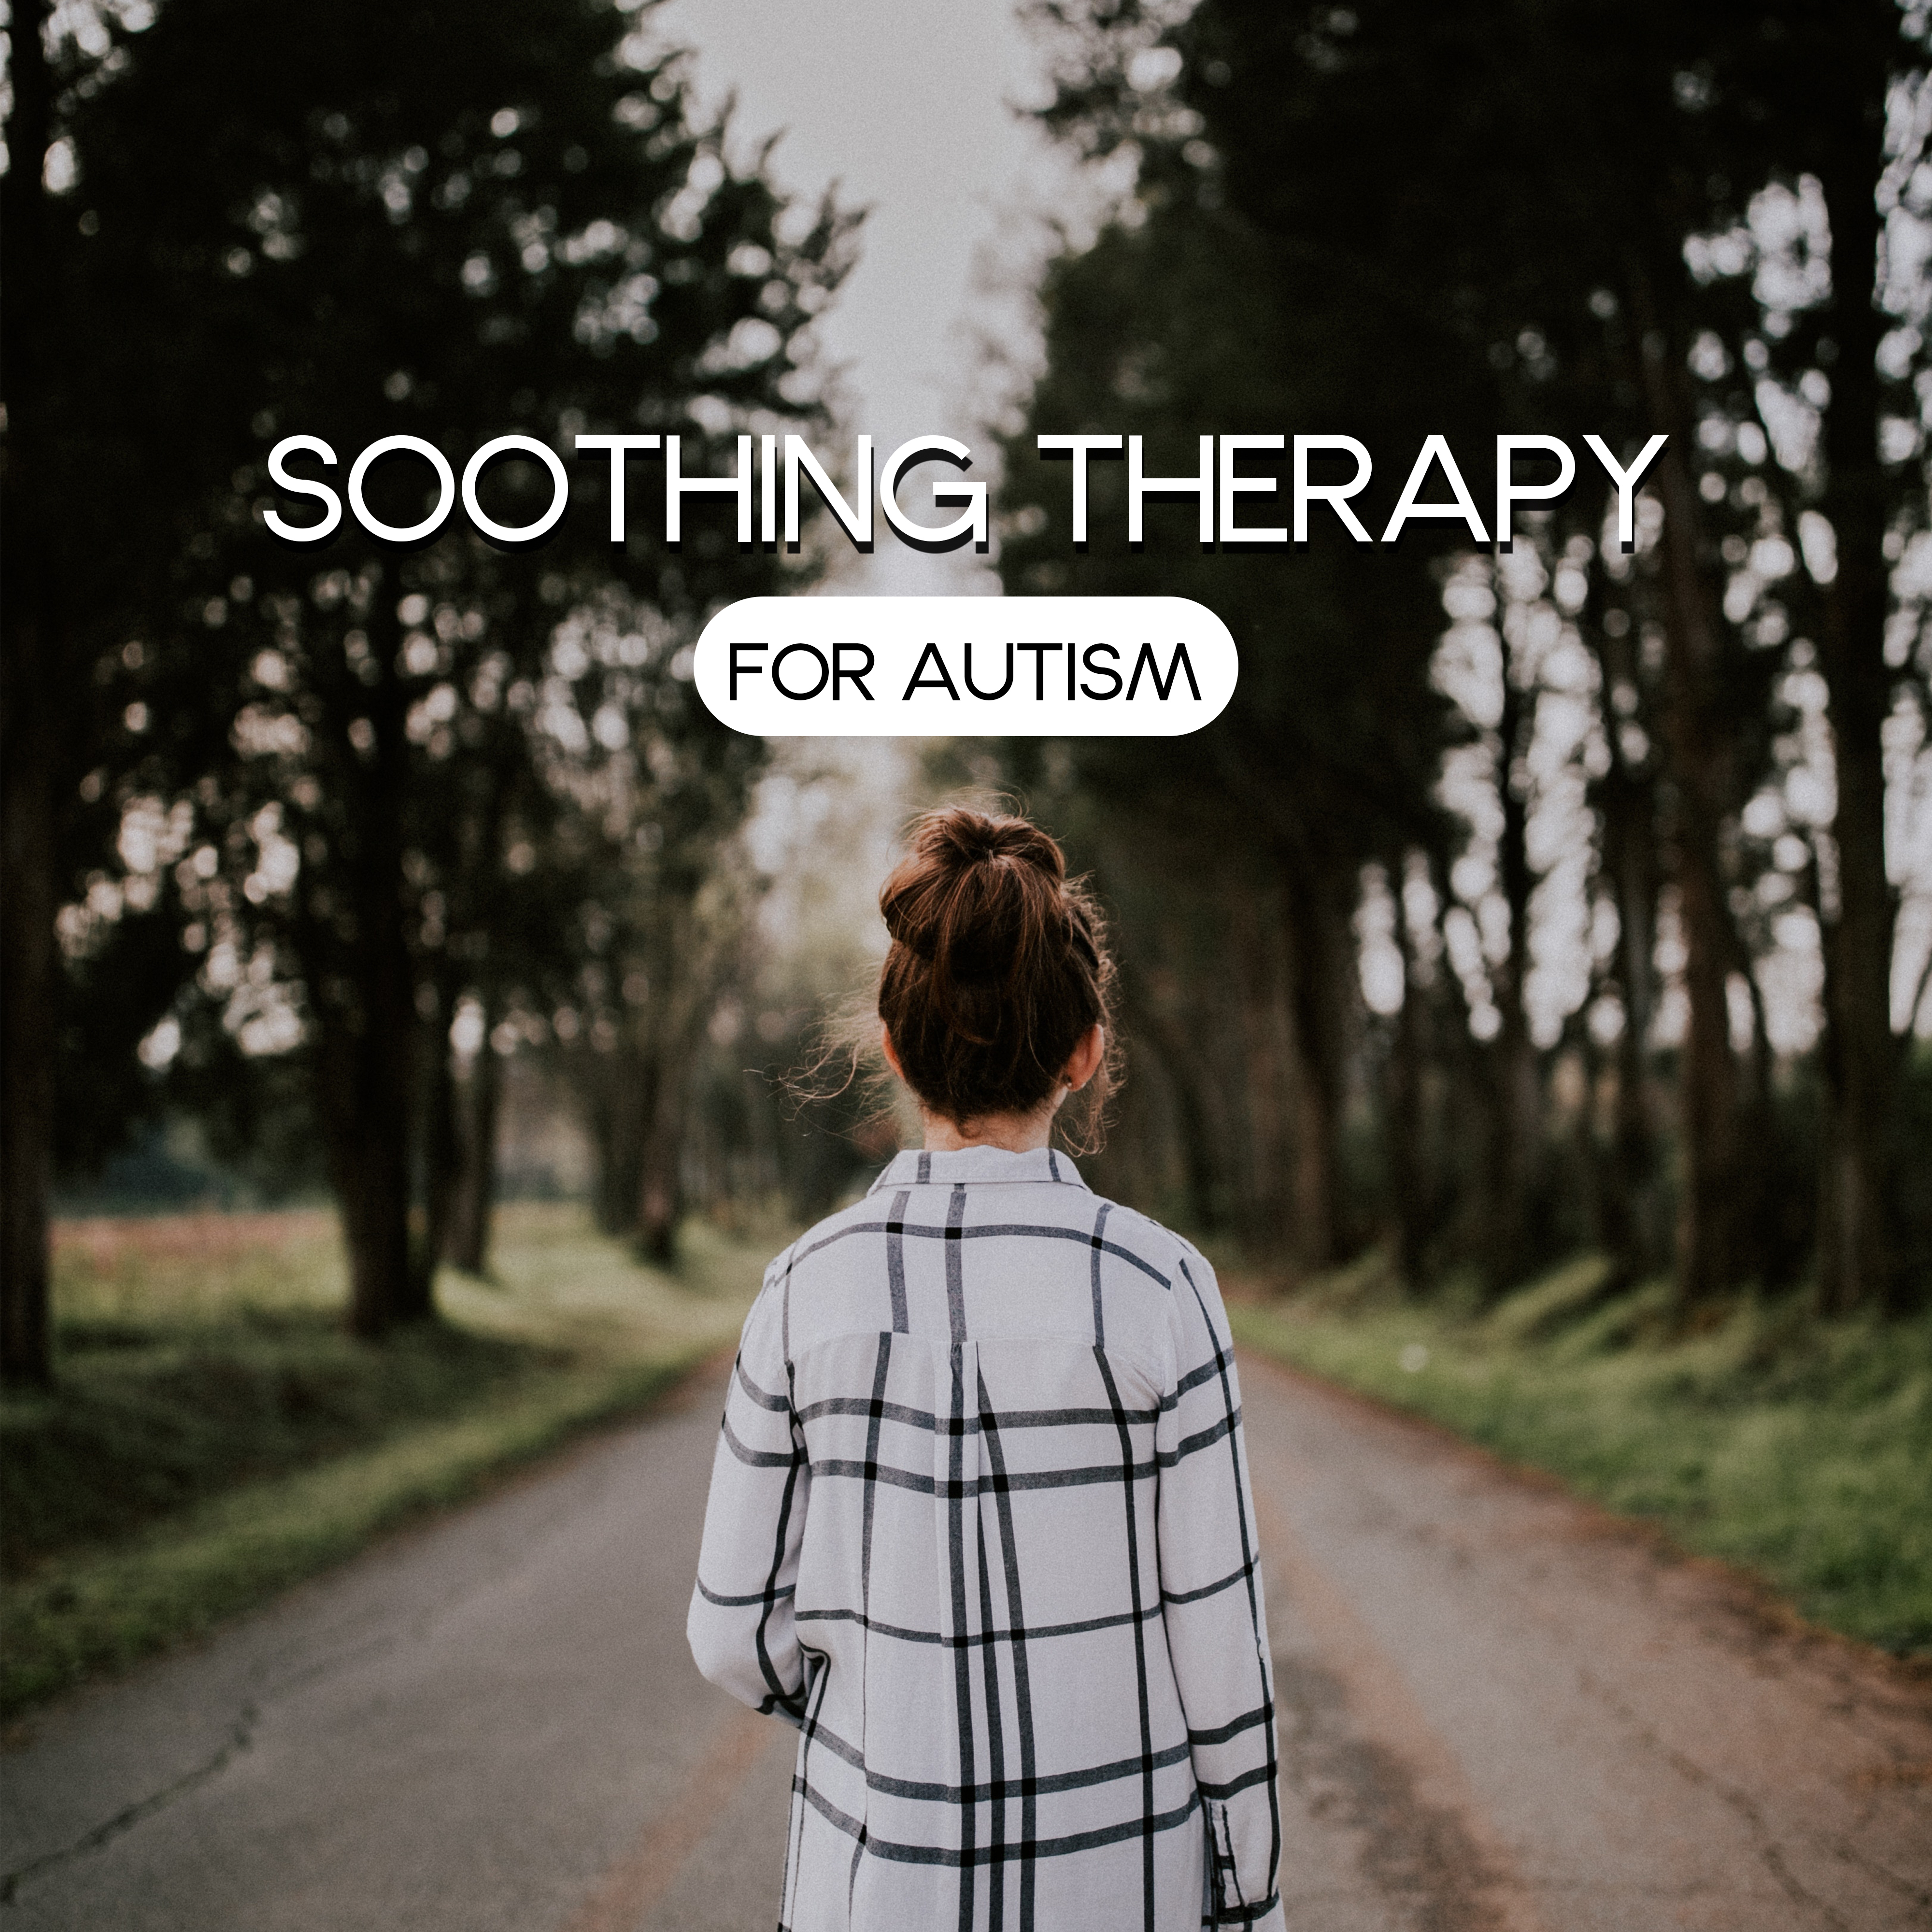 Soothing Therapy for Autism